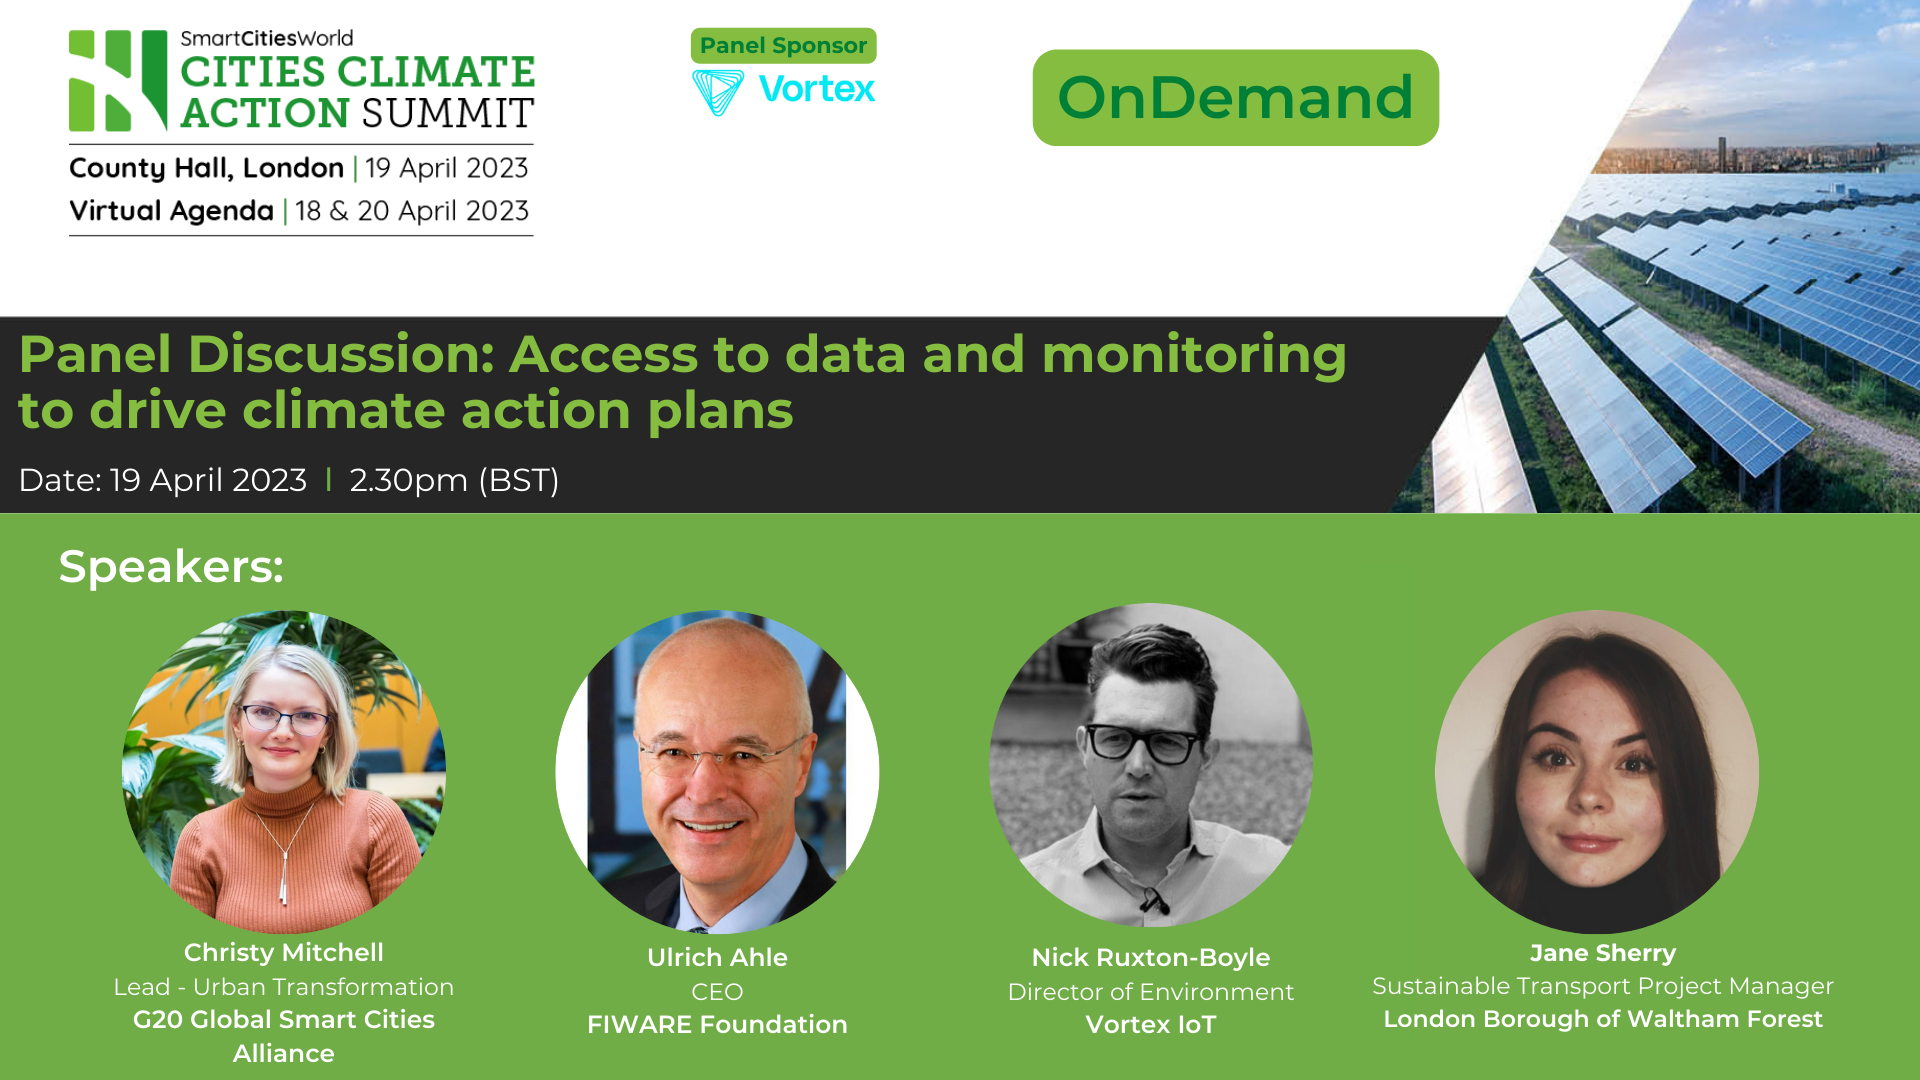 OnDemand Panel discussion: Access to data and monitoring to drive climate action plans